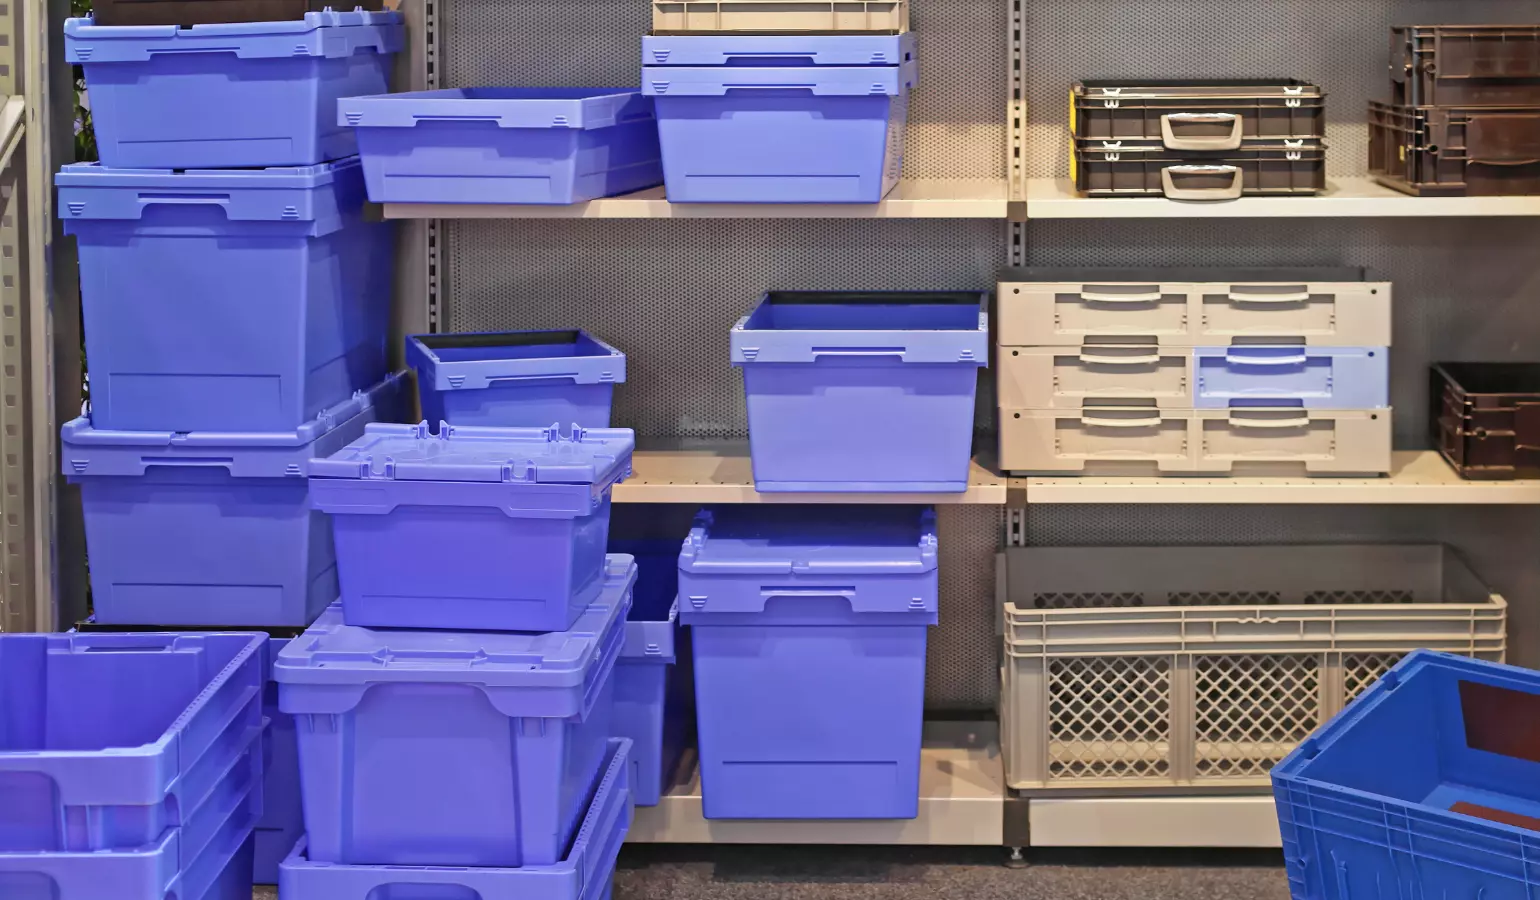 Large Plastic Totes Are Perfect For Long-Term Storage And